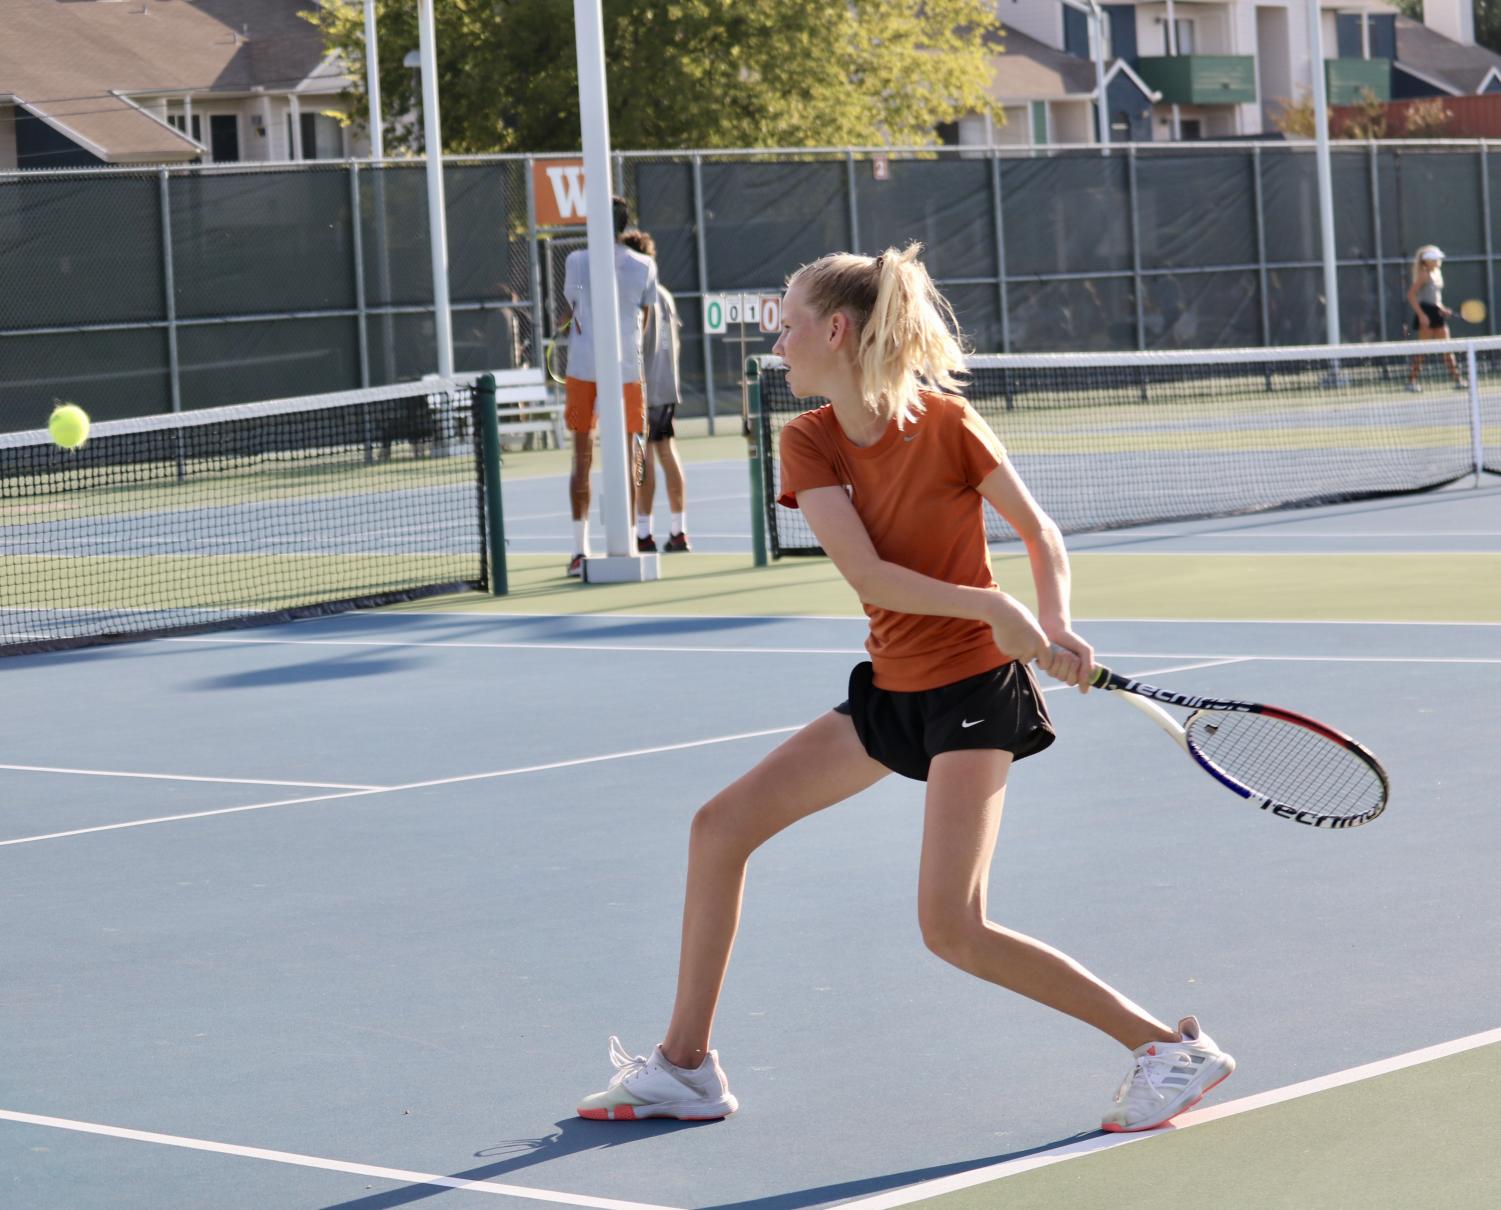 Varsity+Tennis+Secures+11th+District+Title+in+a+Row+with+11-1+Victory+over+Vandegrift